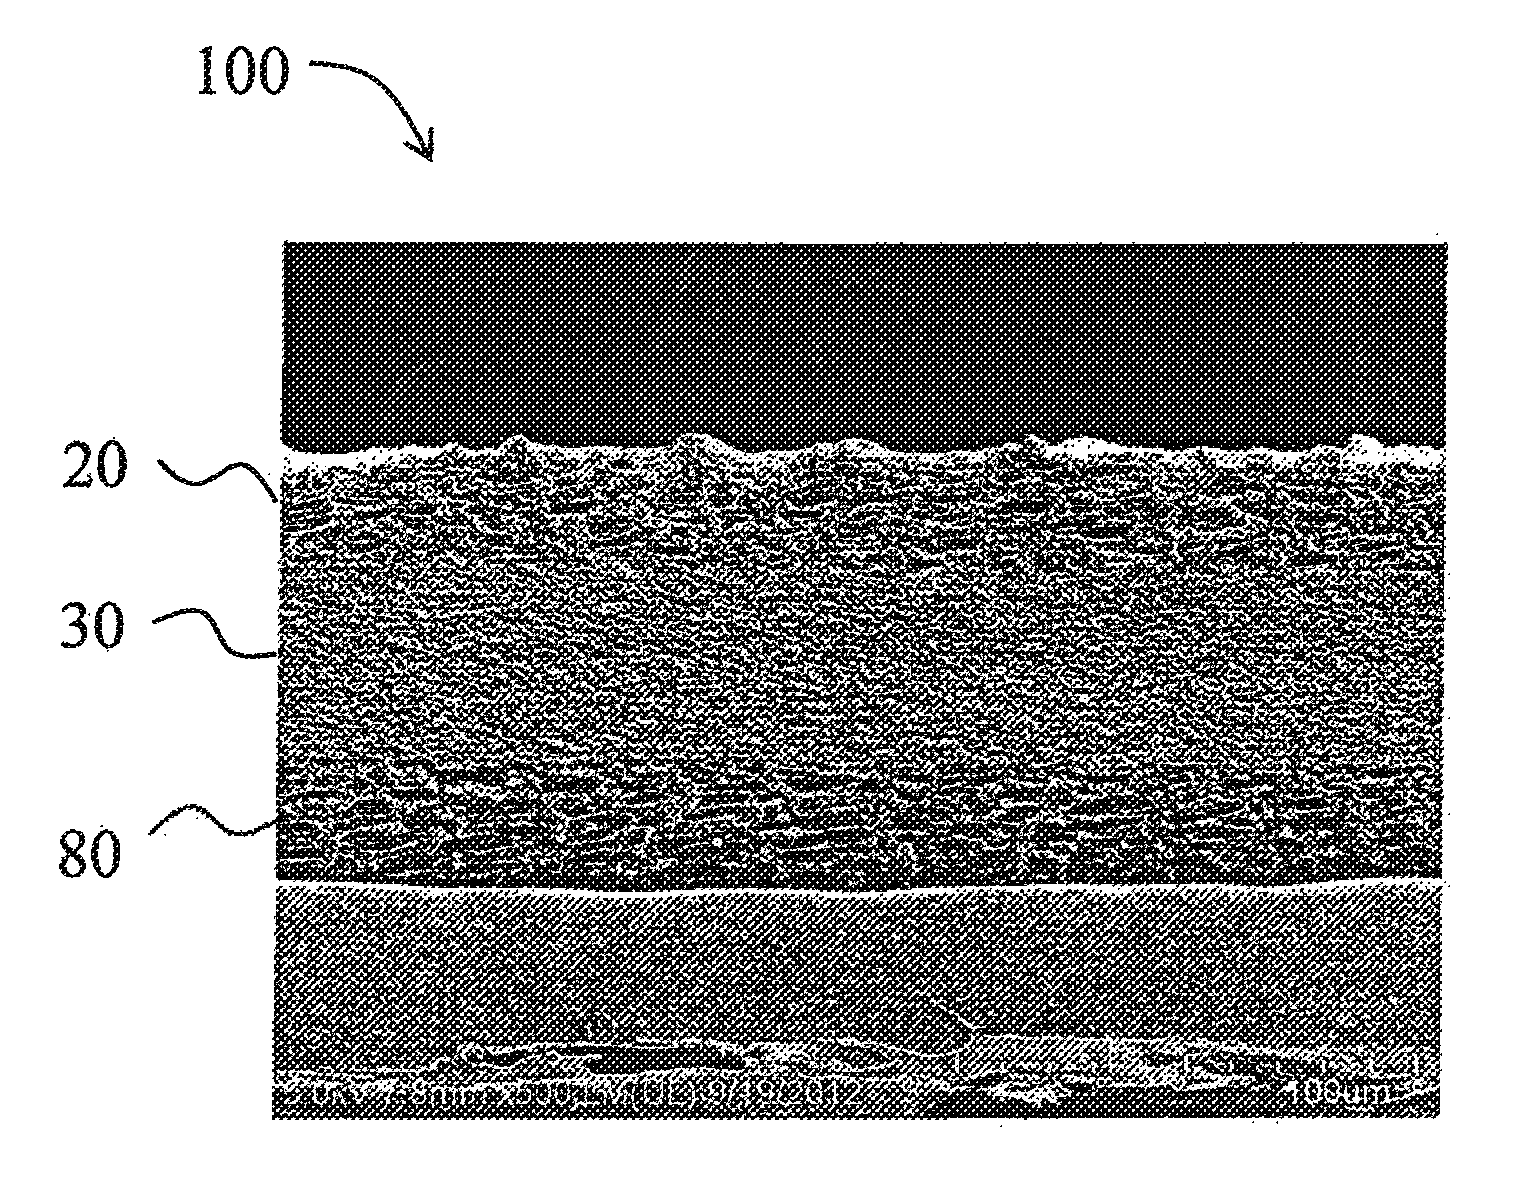 Low gloss, air permeable, abrasion resistant, printable laminate containing an asymmetric membrane and articles made therefrom